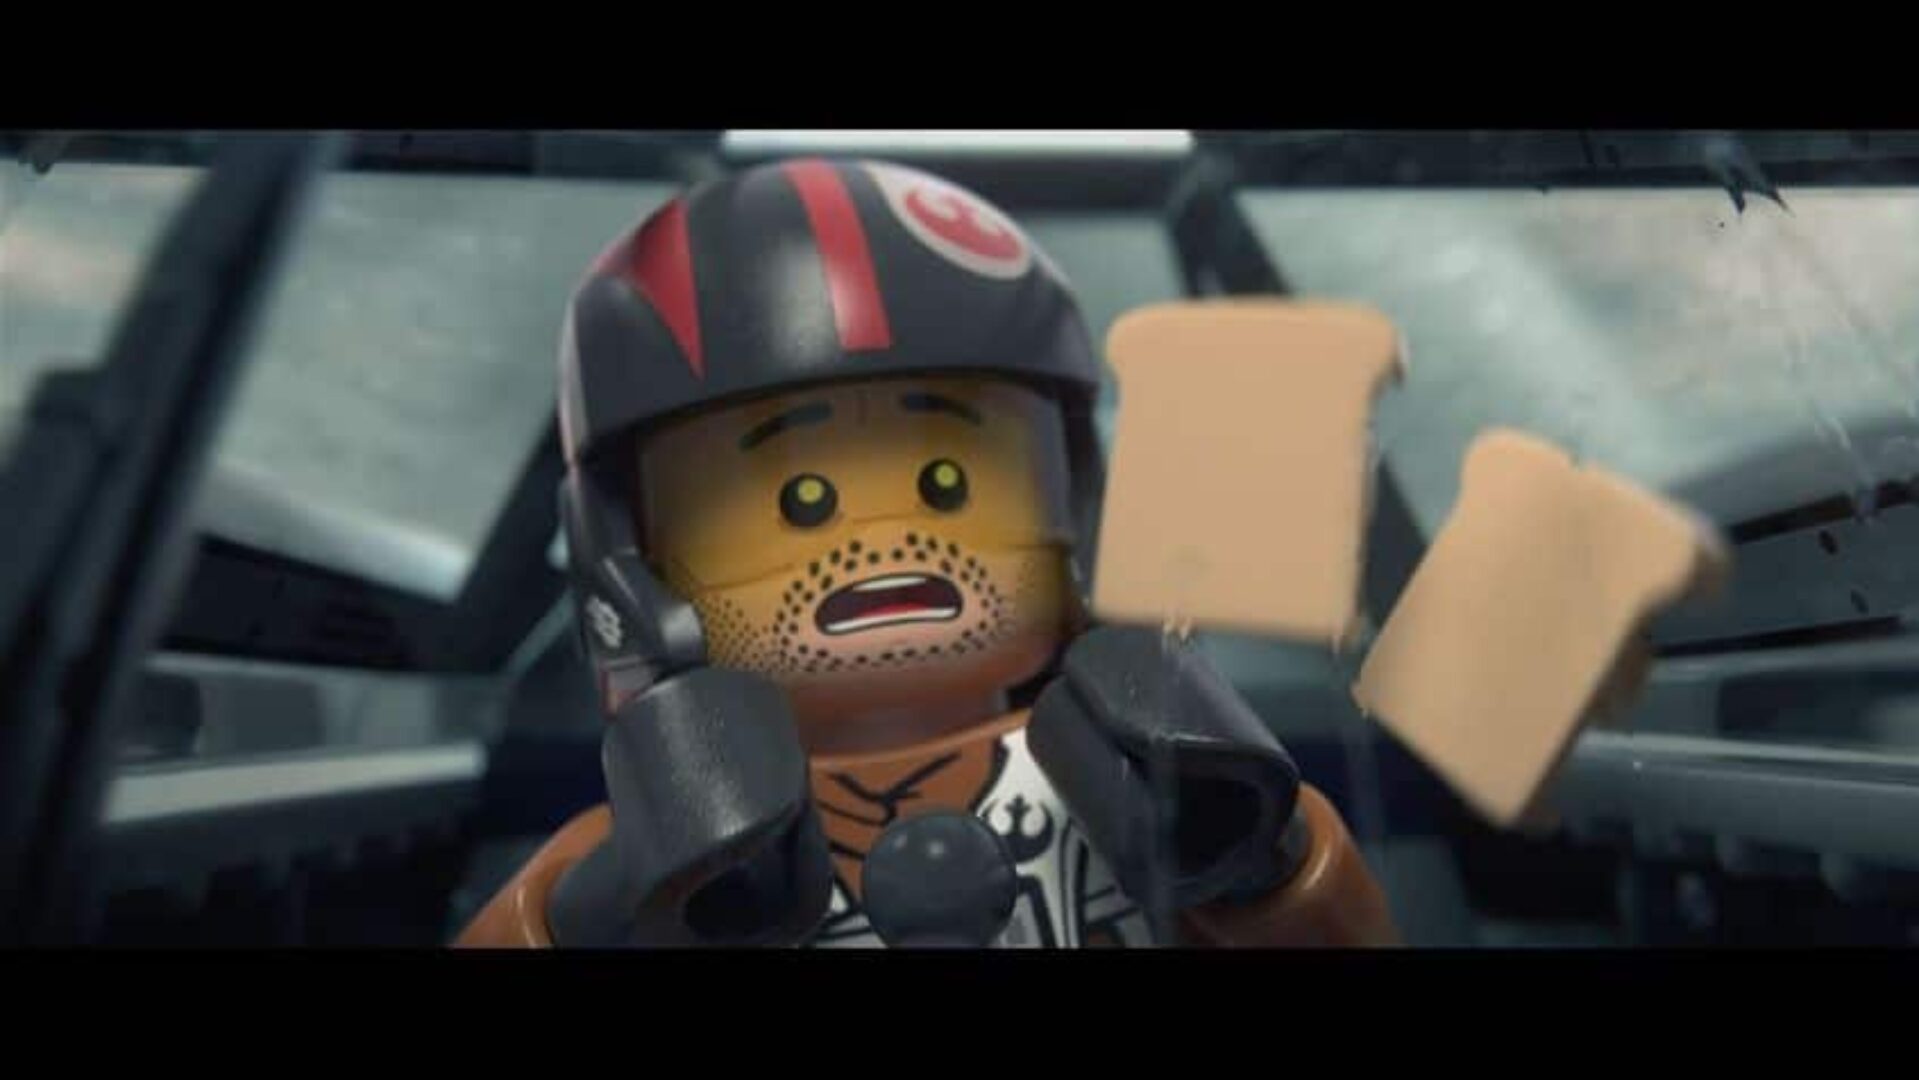 LEGO Star Wars: The Force Awakens Coming Soon to Xbox One